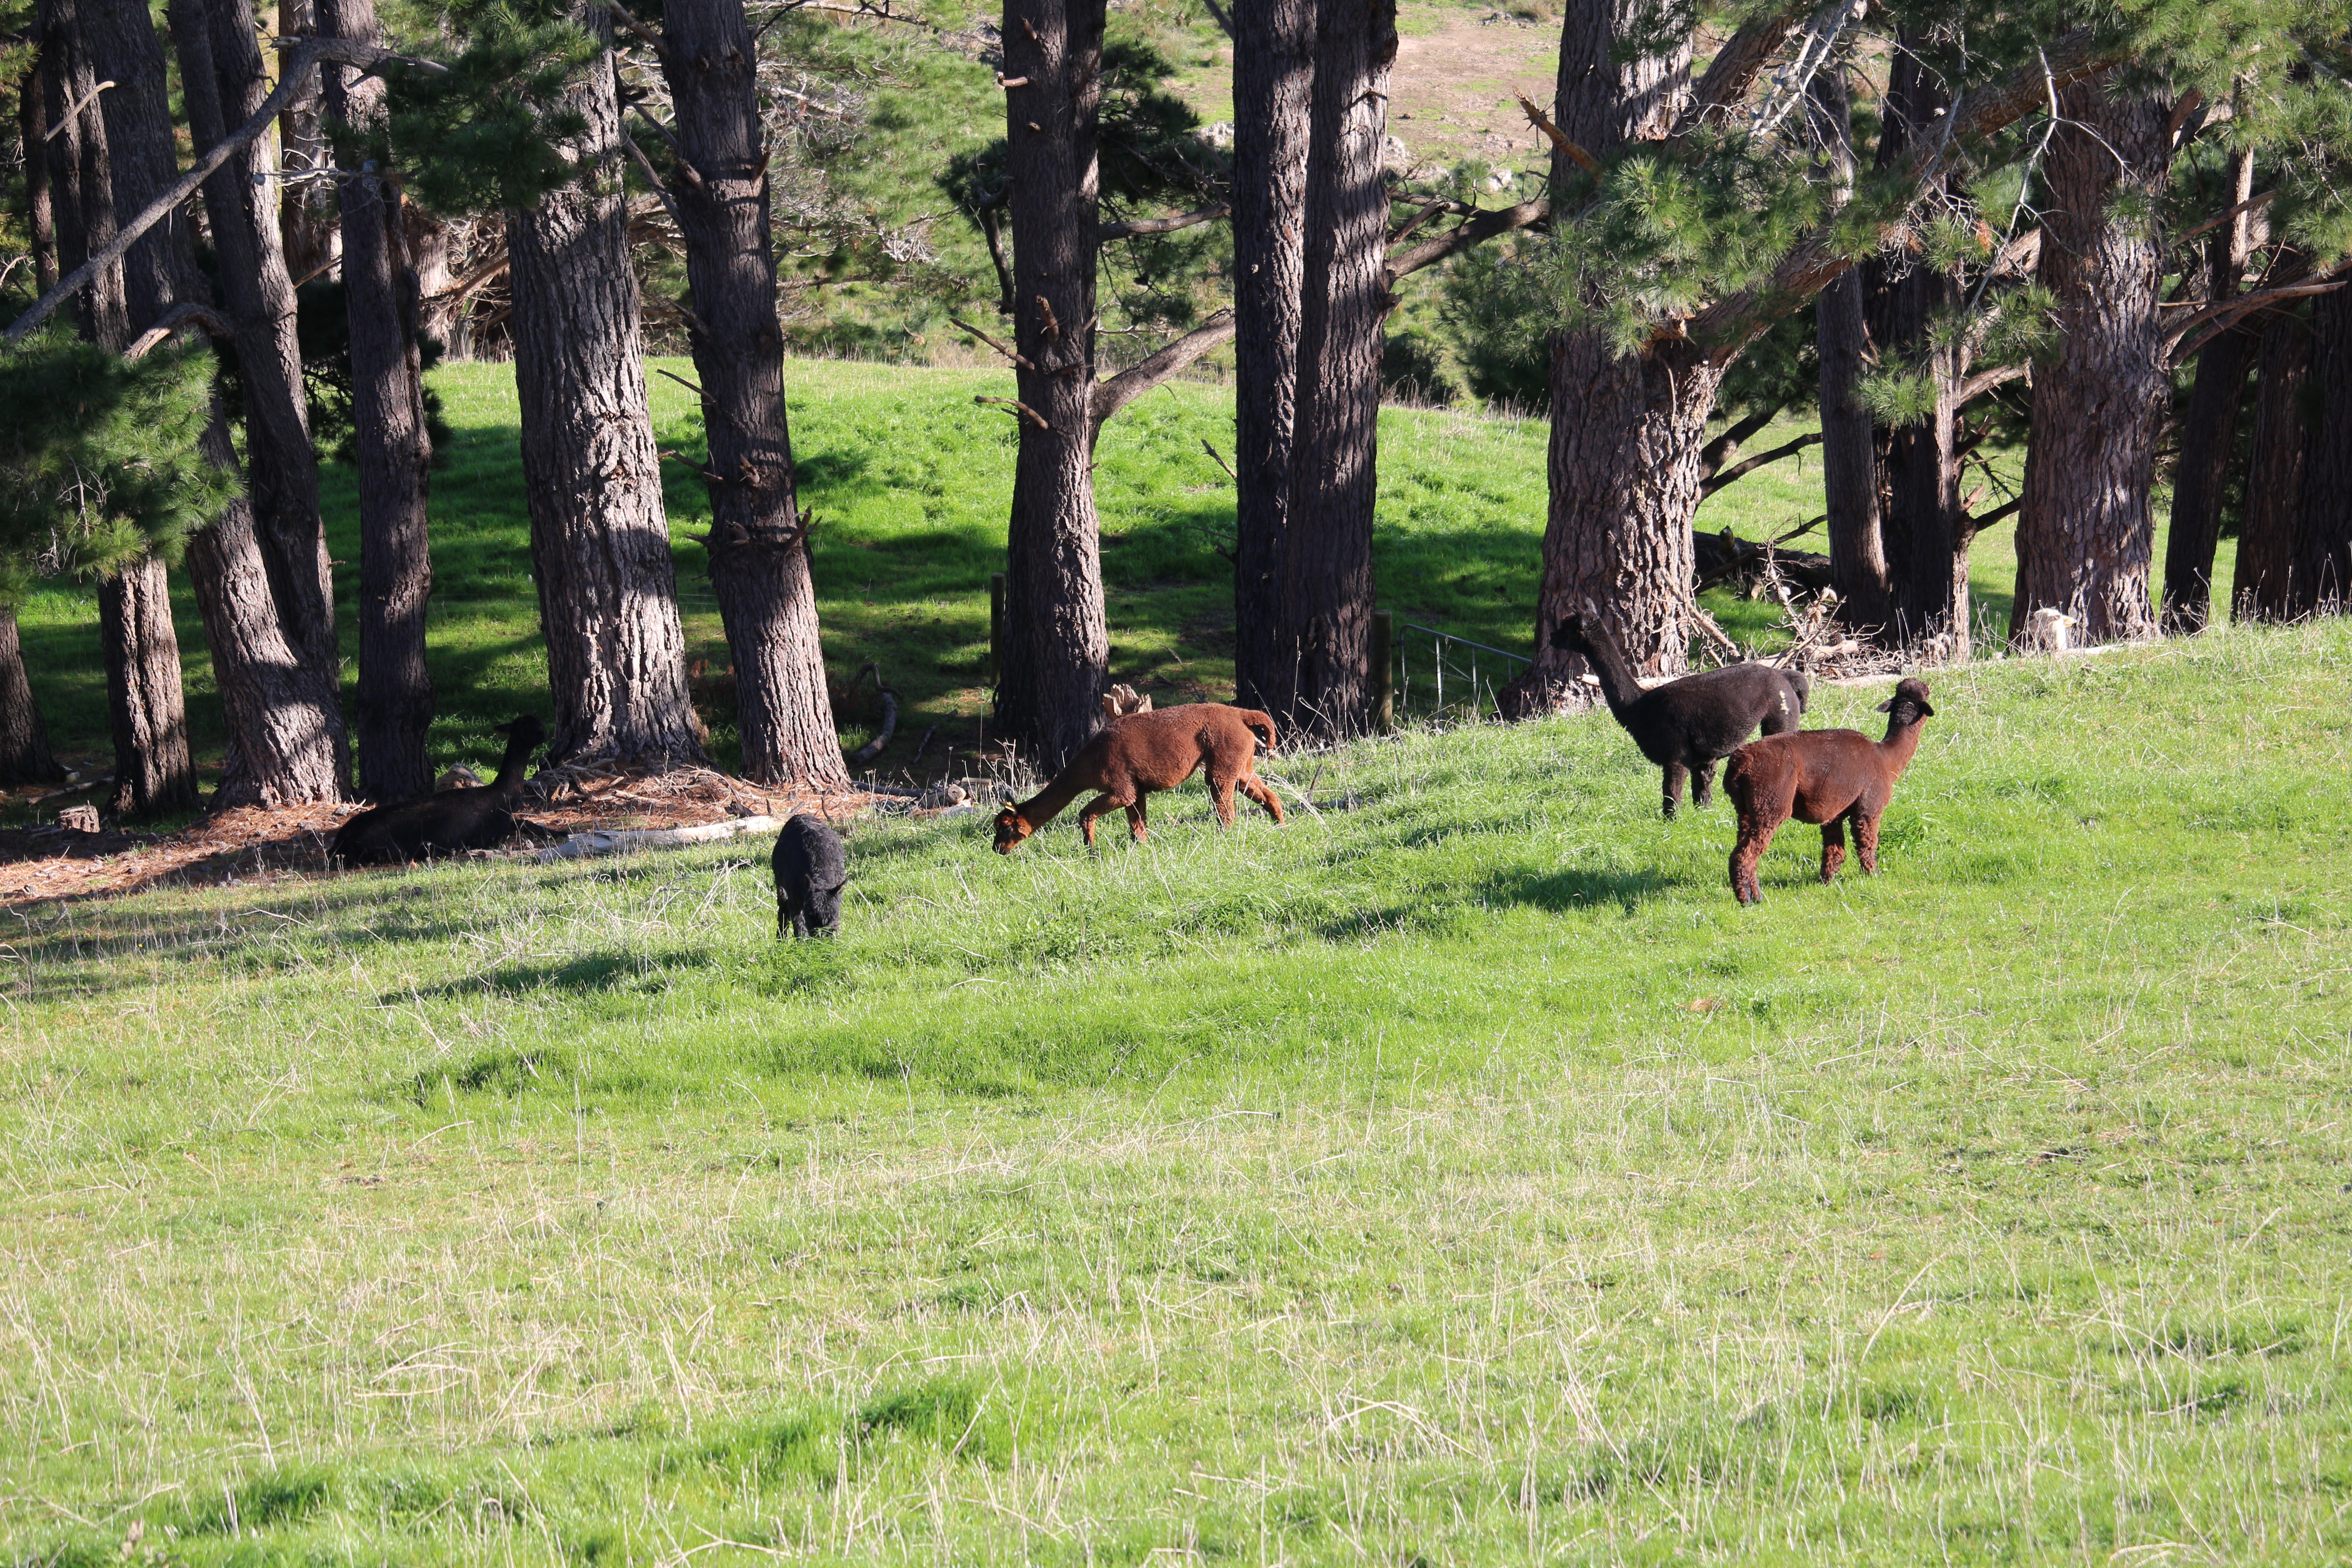 Several light brown to black coloured alpacas in a grassy green paddock sloping down with pine tree trunks in the background